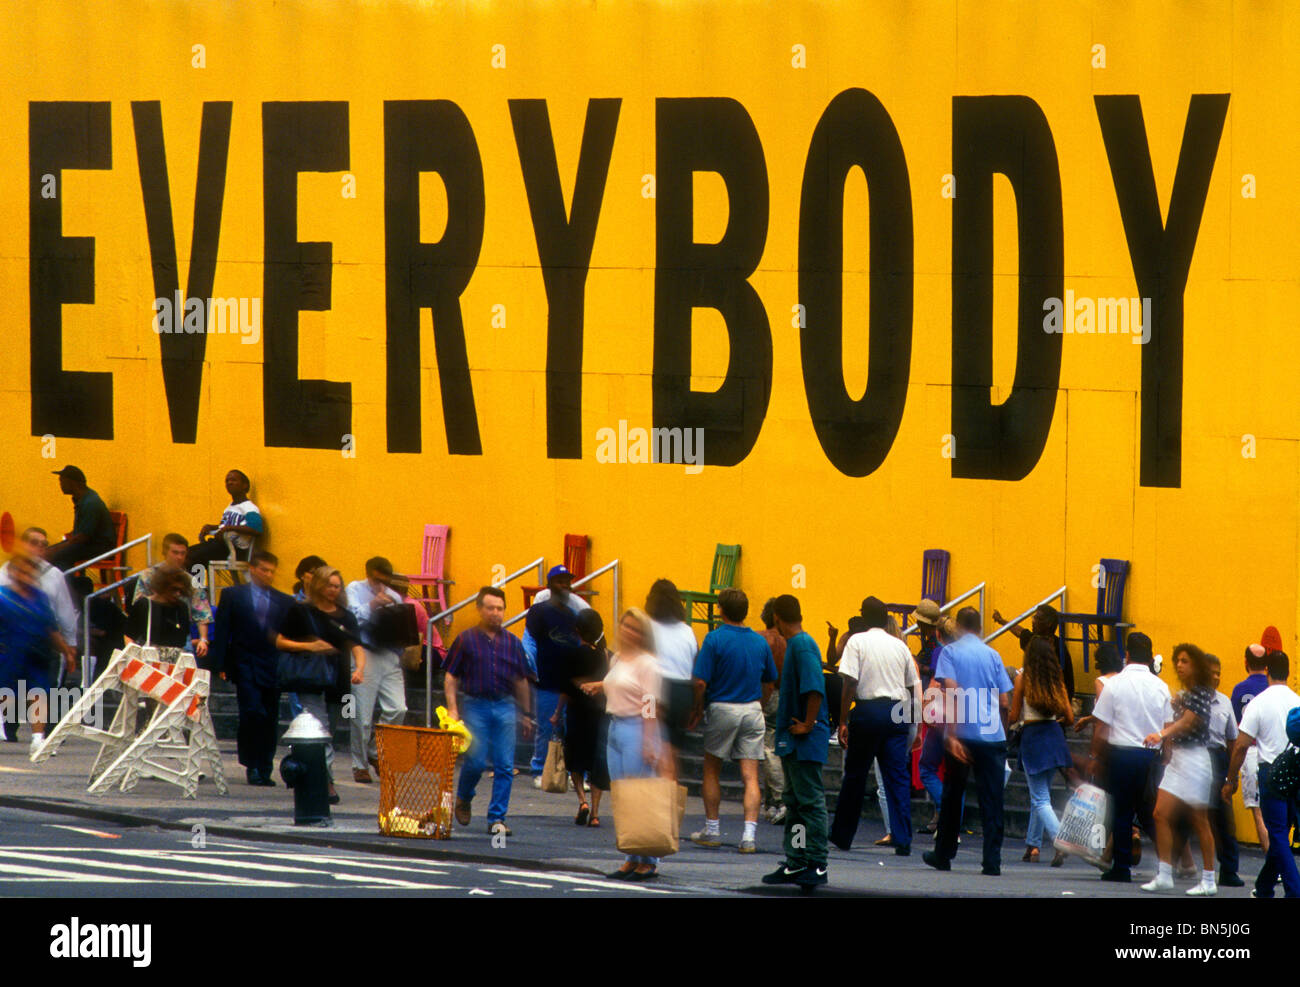 Everybody billboard Times Square Stock Photo